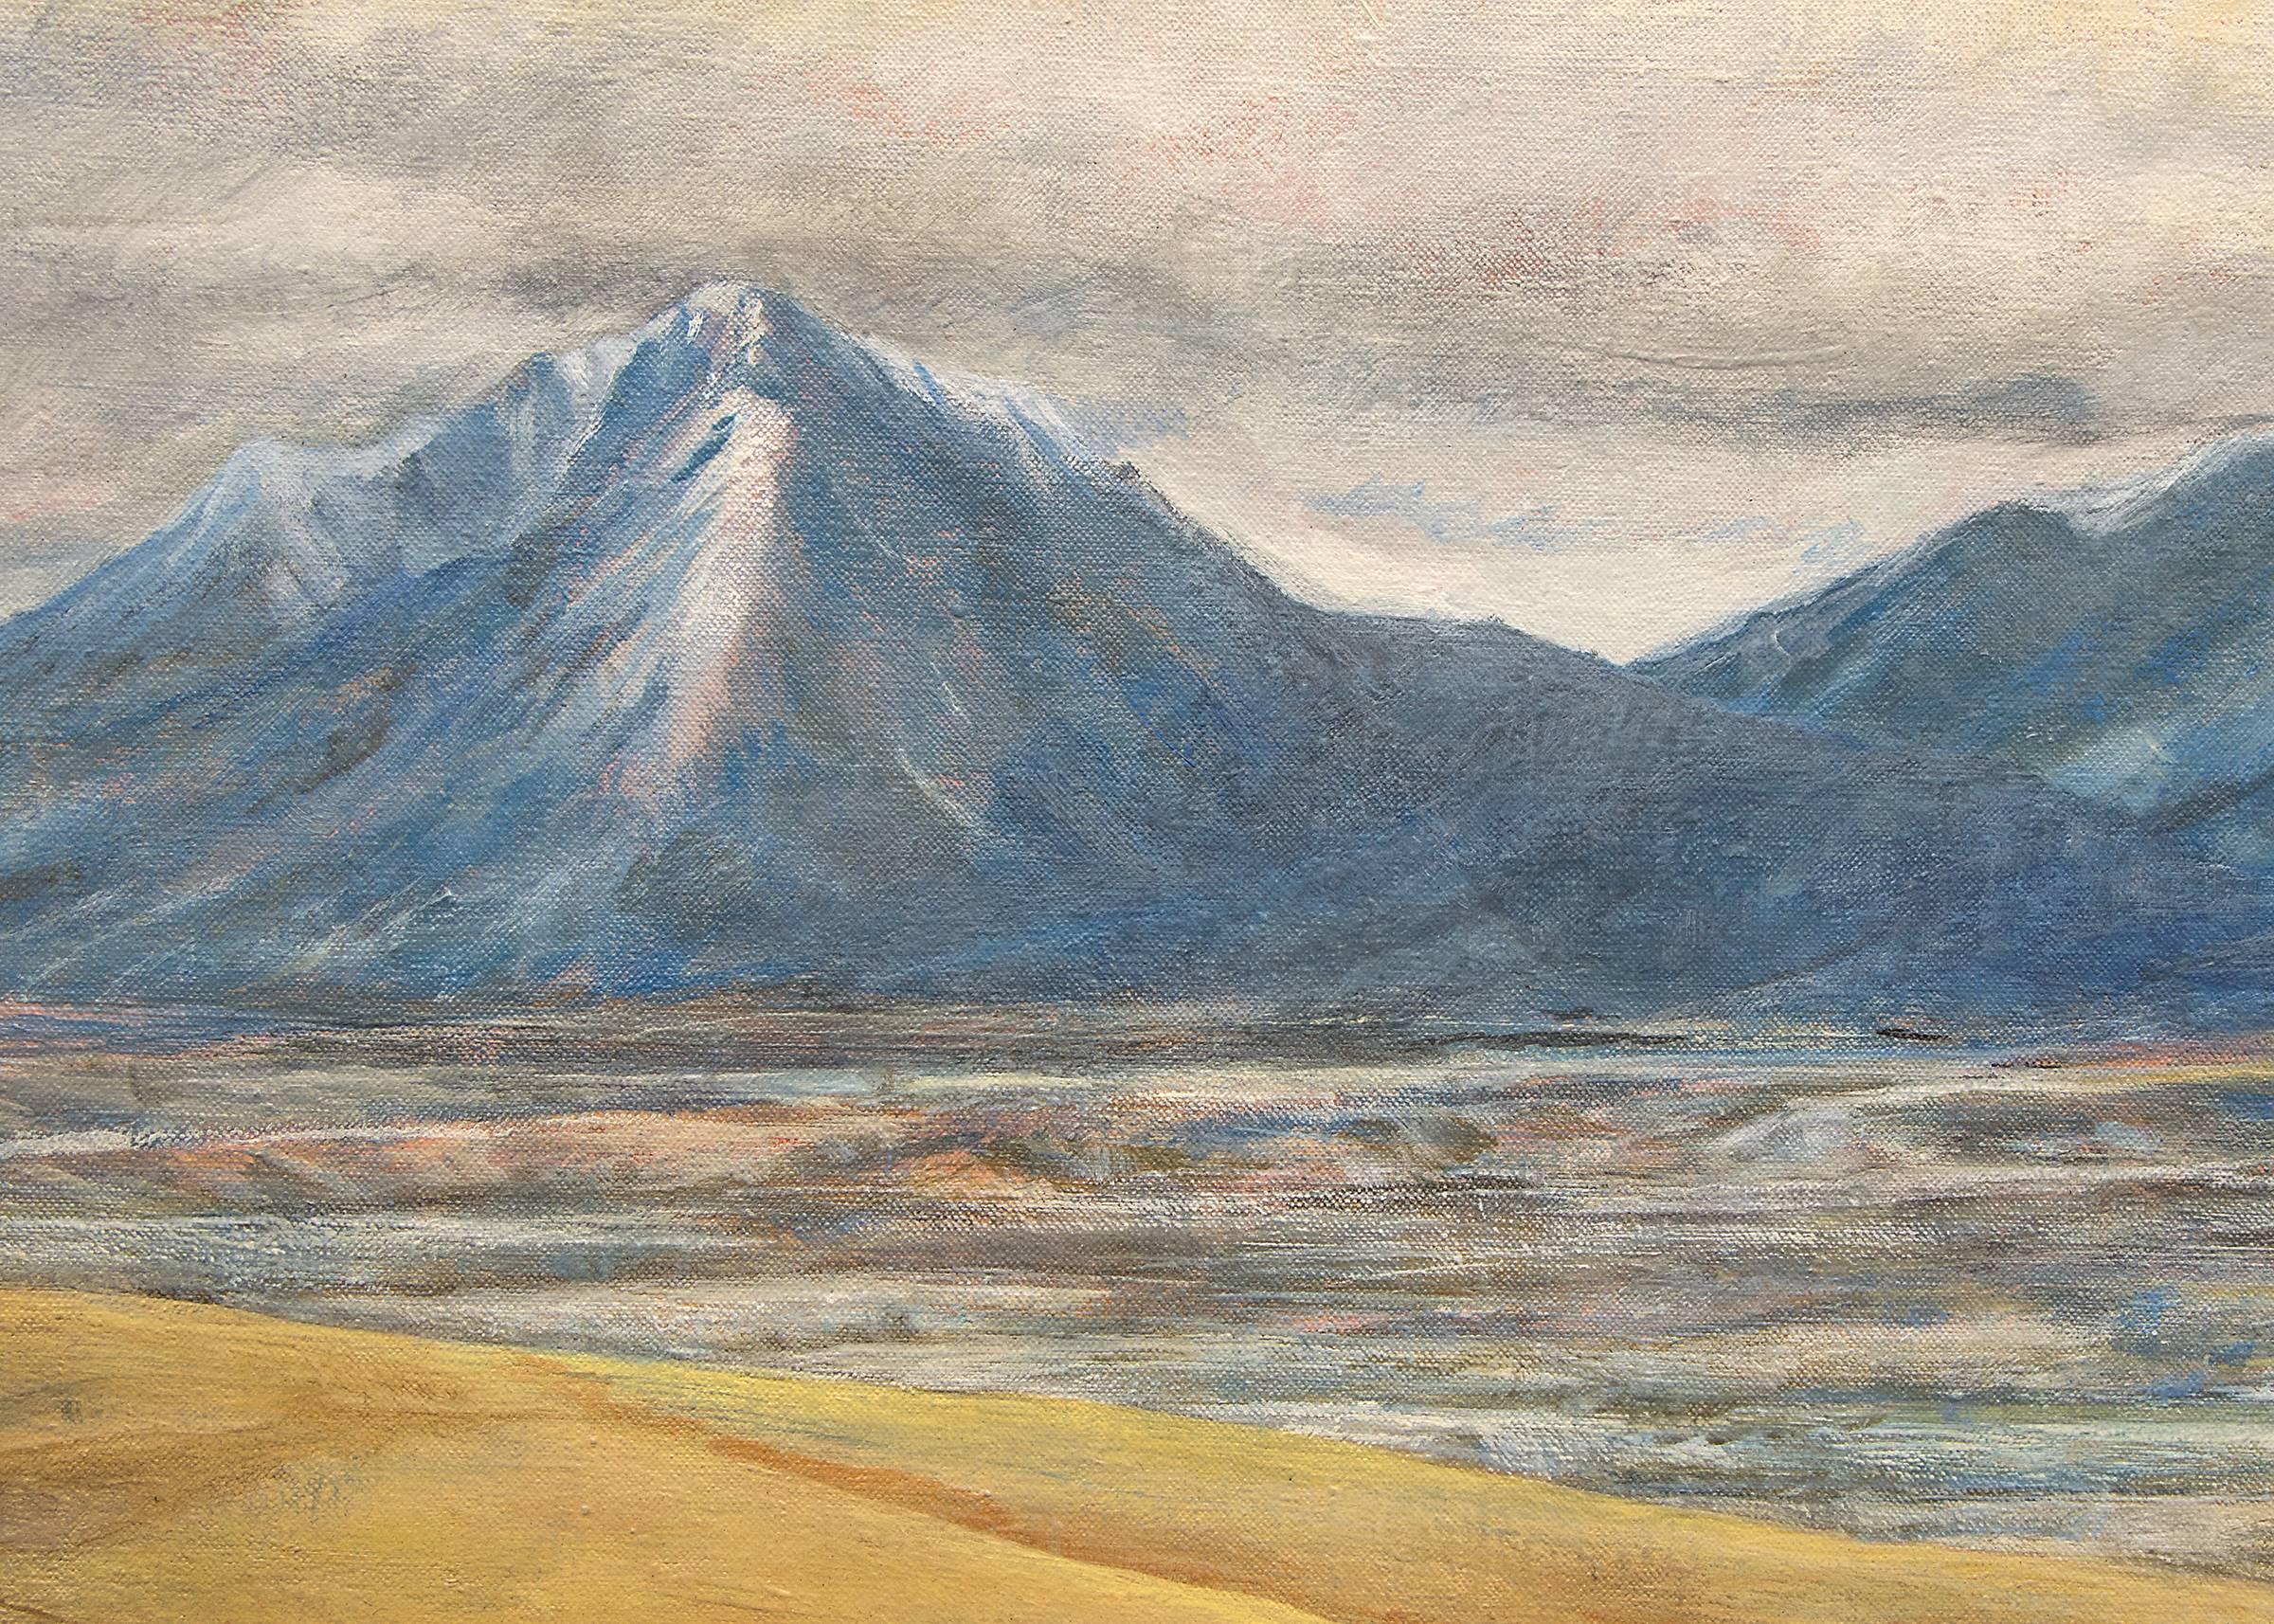 Spanish Peaks (Southern Colorado Landscape) - Gray Figurative Painting by Unknown